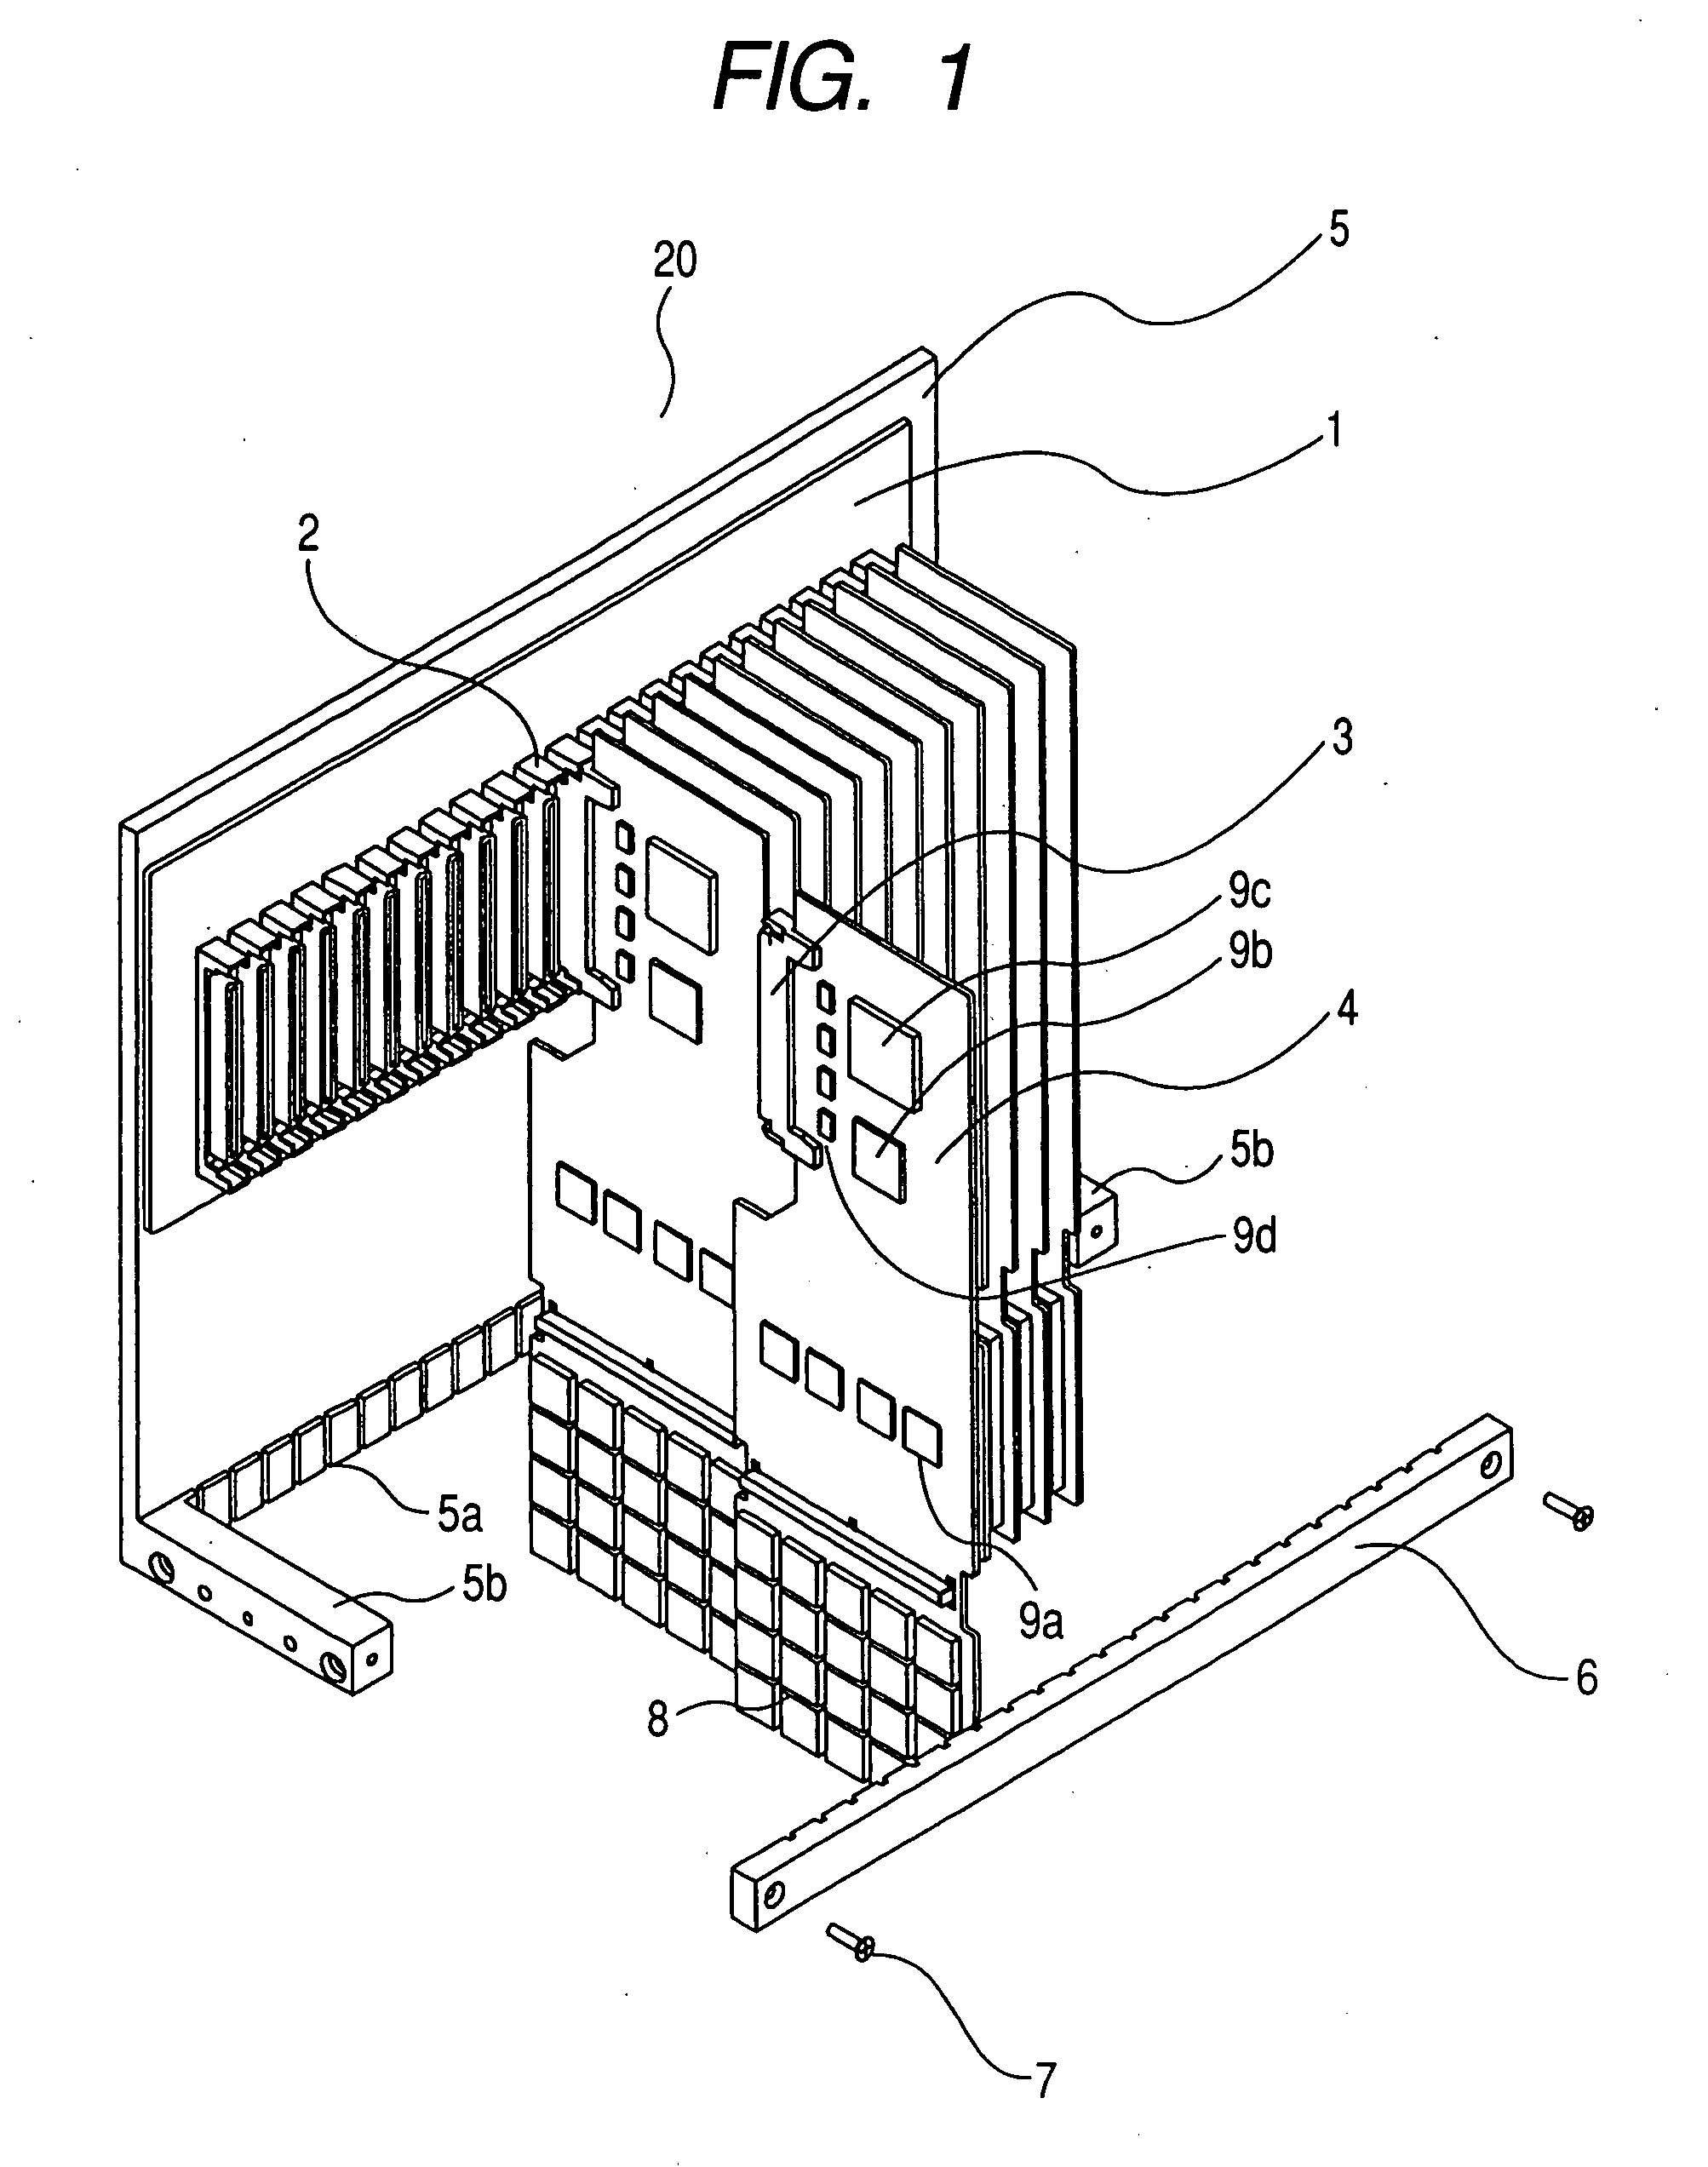 Structure for mounting printed board and nuclear medicine diagnosis system